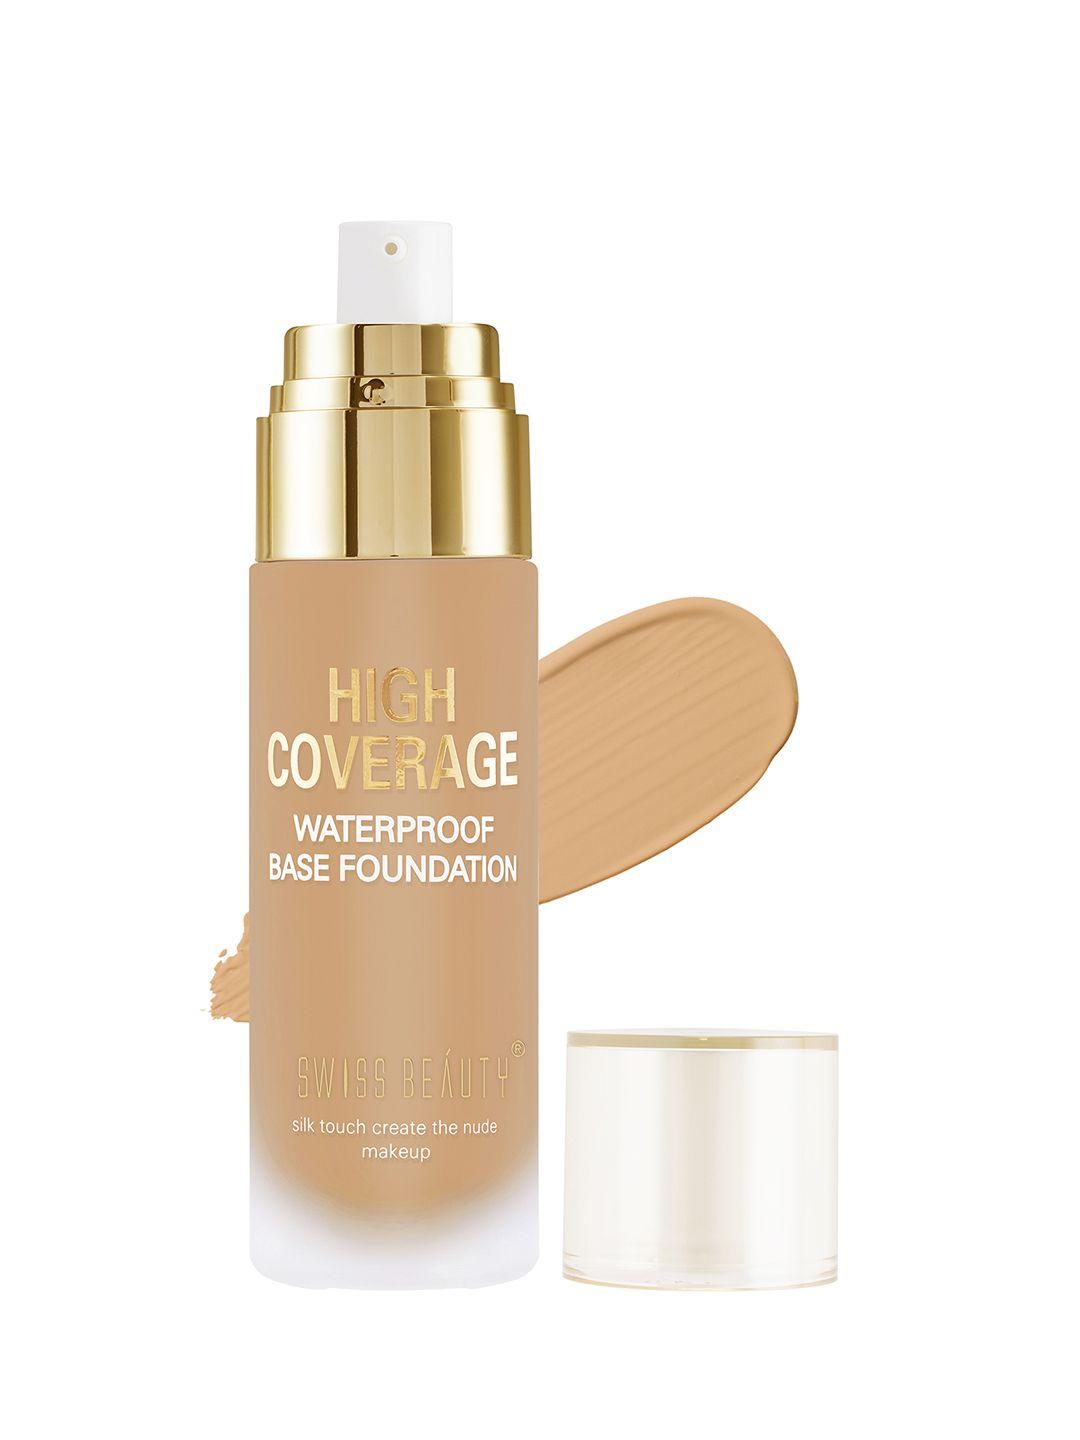 swiss beauty high coverage waterproof base foundation with niacinamide - natural buff 55 g